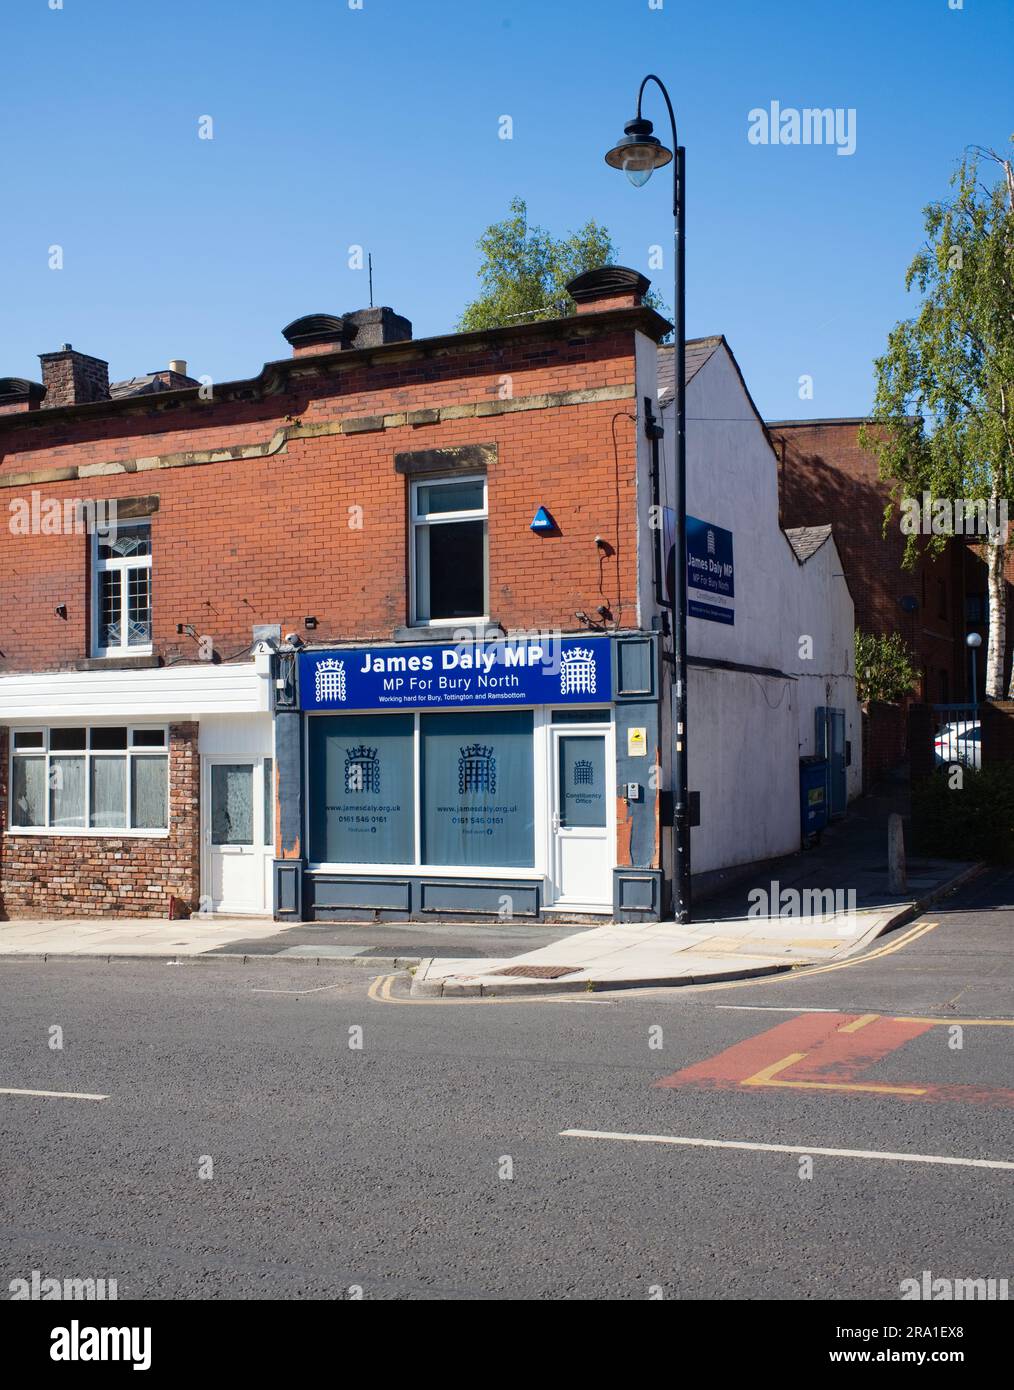 The Constituency Office of James Daly the Conservative MP for Bury North Stock Photo